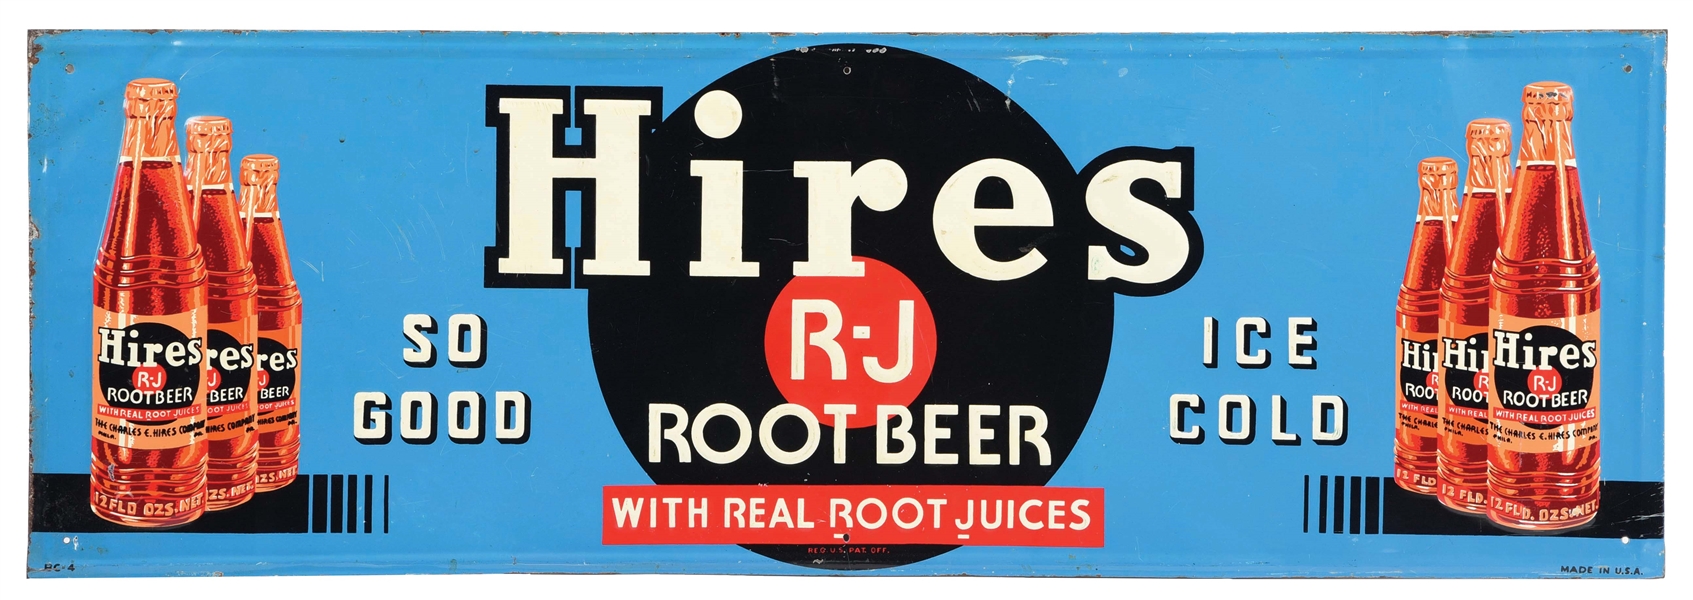 HIRES R-J ROOT BEER WITH REAL ROOT JUICE EMBOSSED TIN SIGN W/ BOTTLE GRAPHIC.